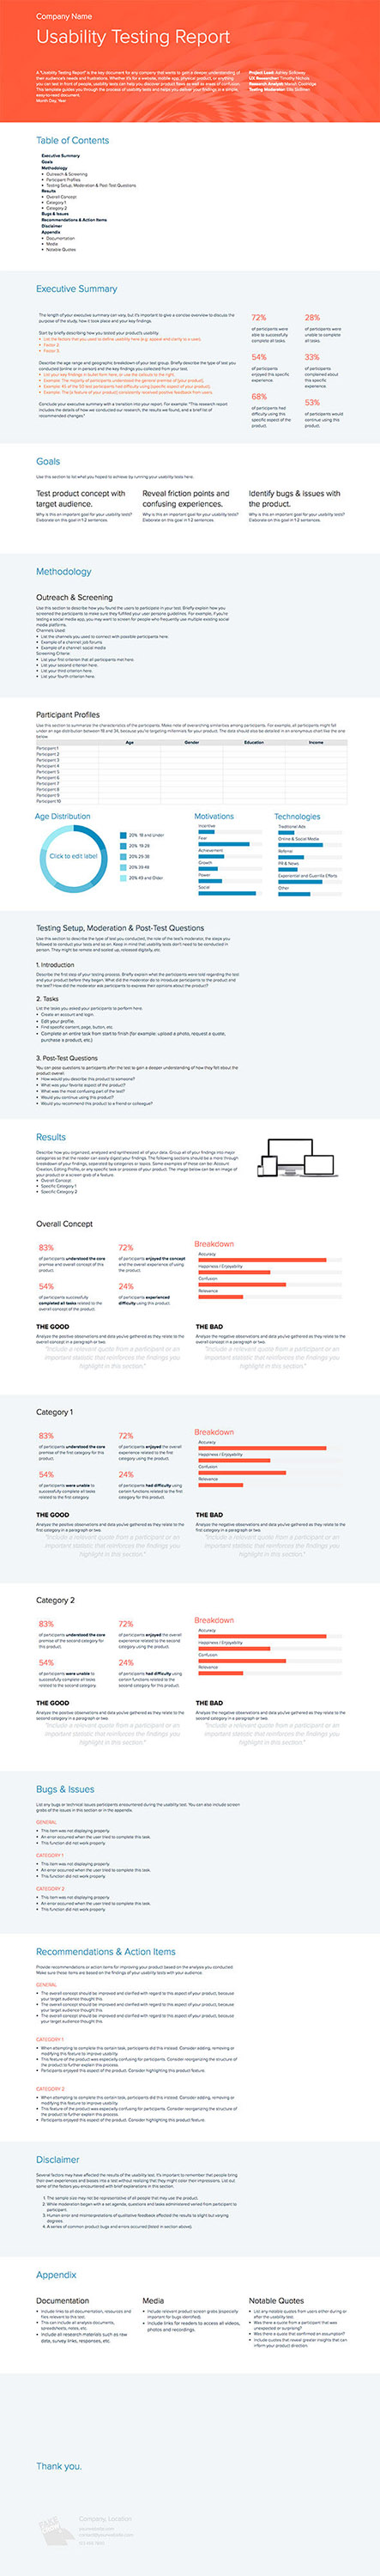 How to write a Usability Testing Report (with samples) Xtensio